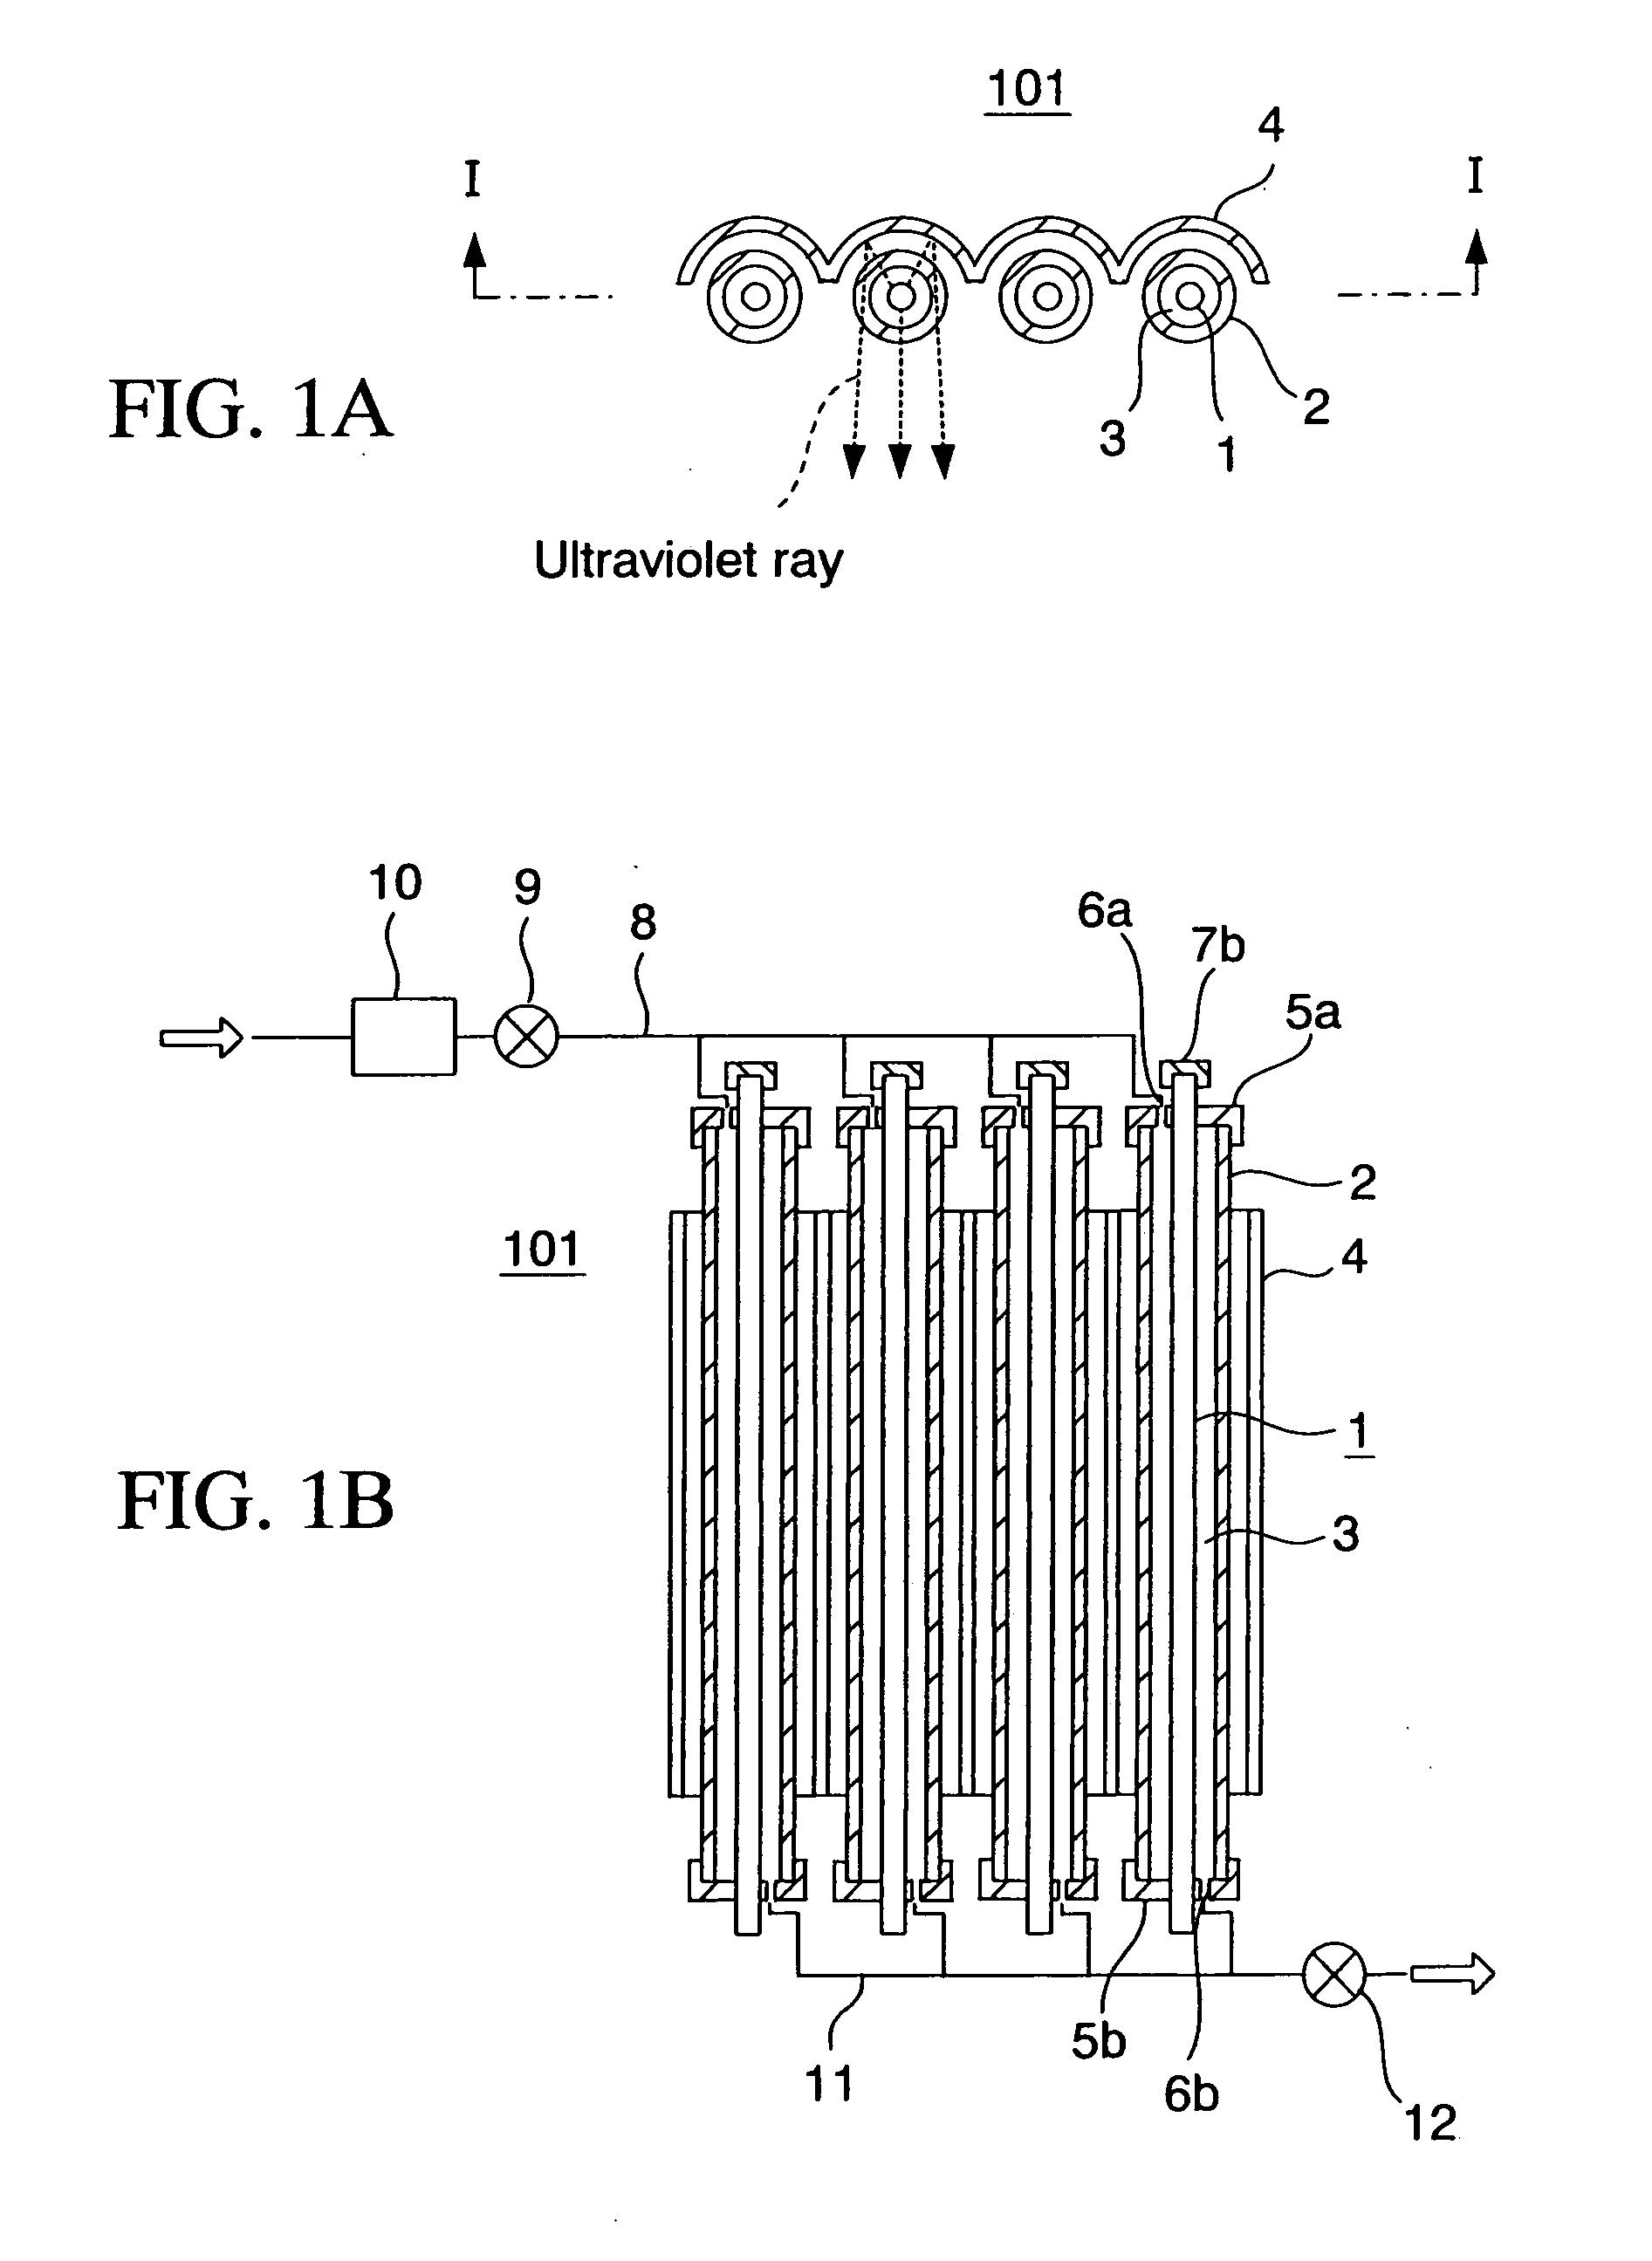 Ultraviolet ray generator, ultraviolet ray irradiation processing apparatus, and semiconductor manufacturing system